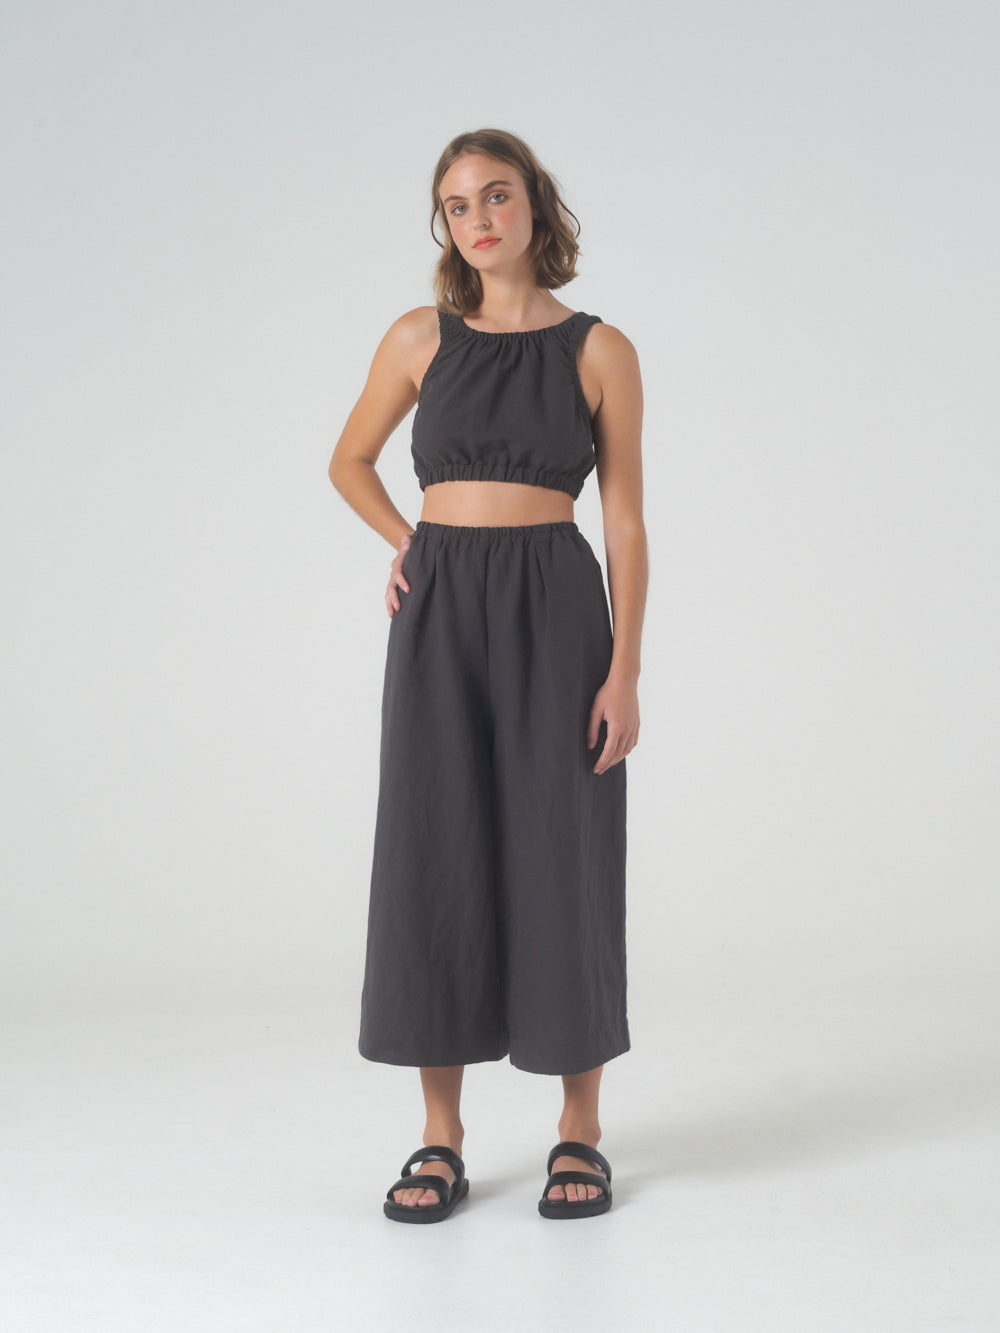 SAMPLE SALE - Soleil Tank in Charcoal - SMALL